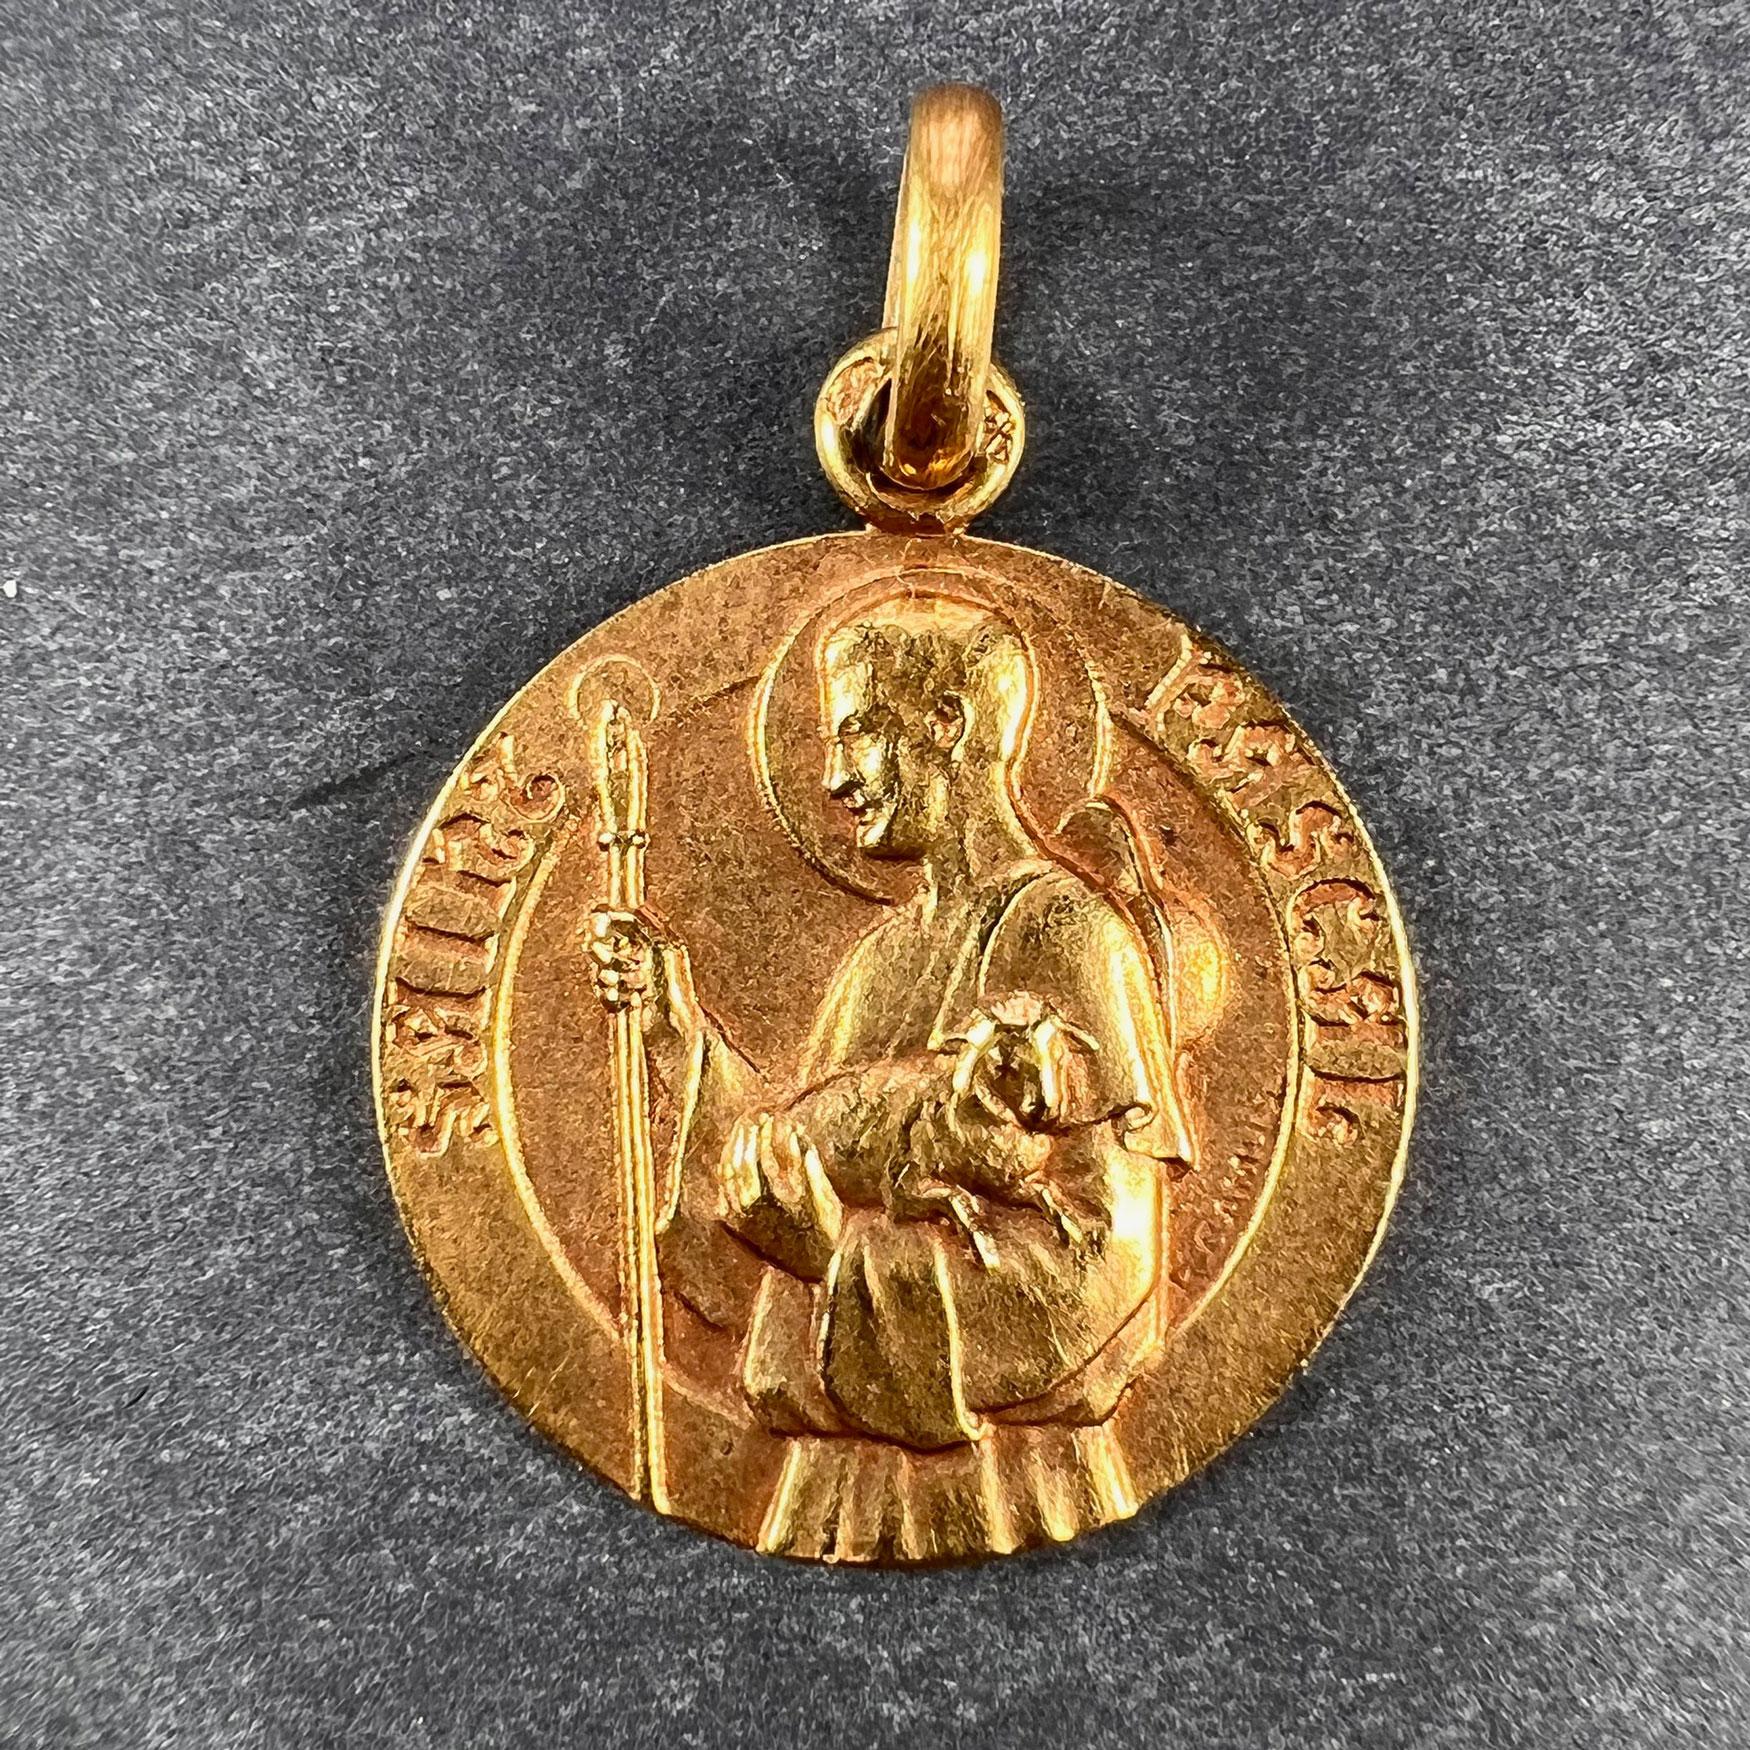 A French 18 karat (18K) yellow gold charm pendant designed as a medal depicting Saint Pascal with shepherd’s crook and lamb. Signed S. Camus, and stamped with the eagle mark for 18 karat gold and French manufacture with an unknown maker's mark. 